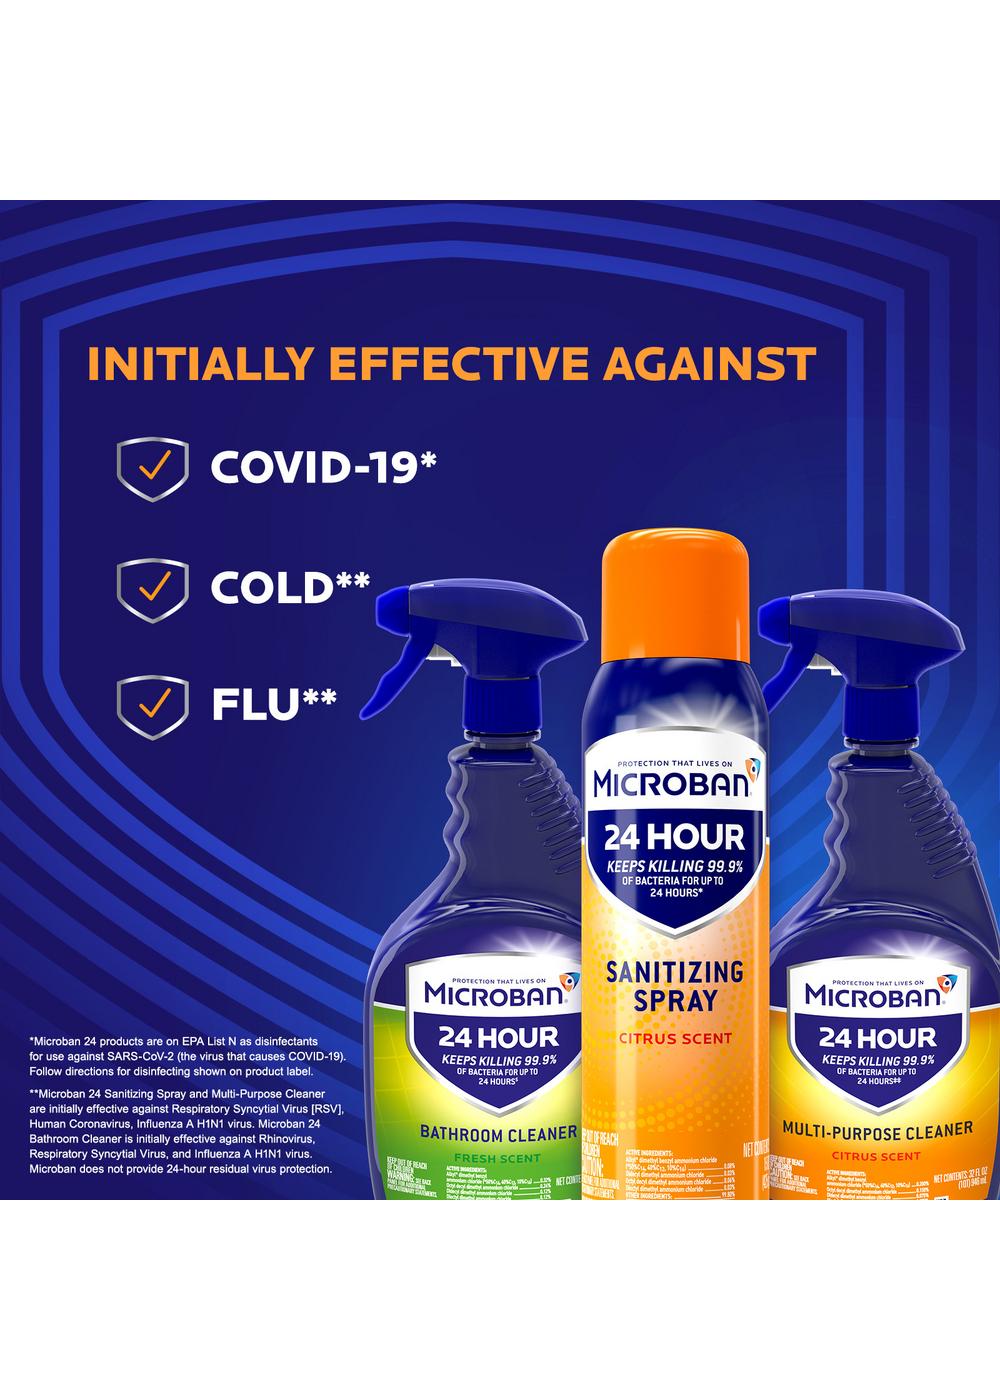 Microban Citrus 24 Hour Bathroom Cleaner and Sanitizing Spray; image 7 of 11